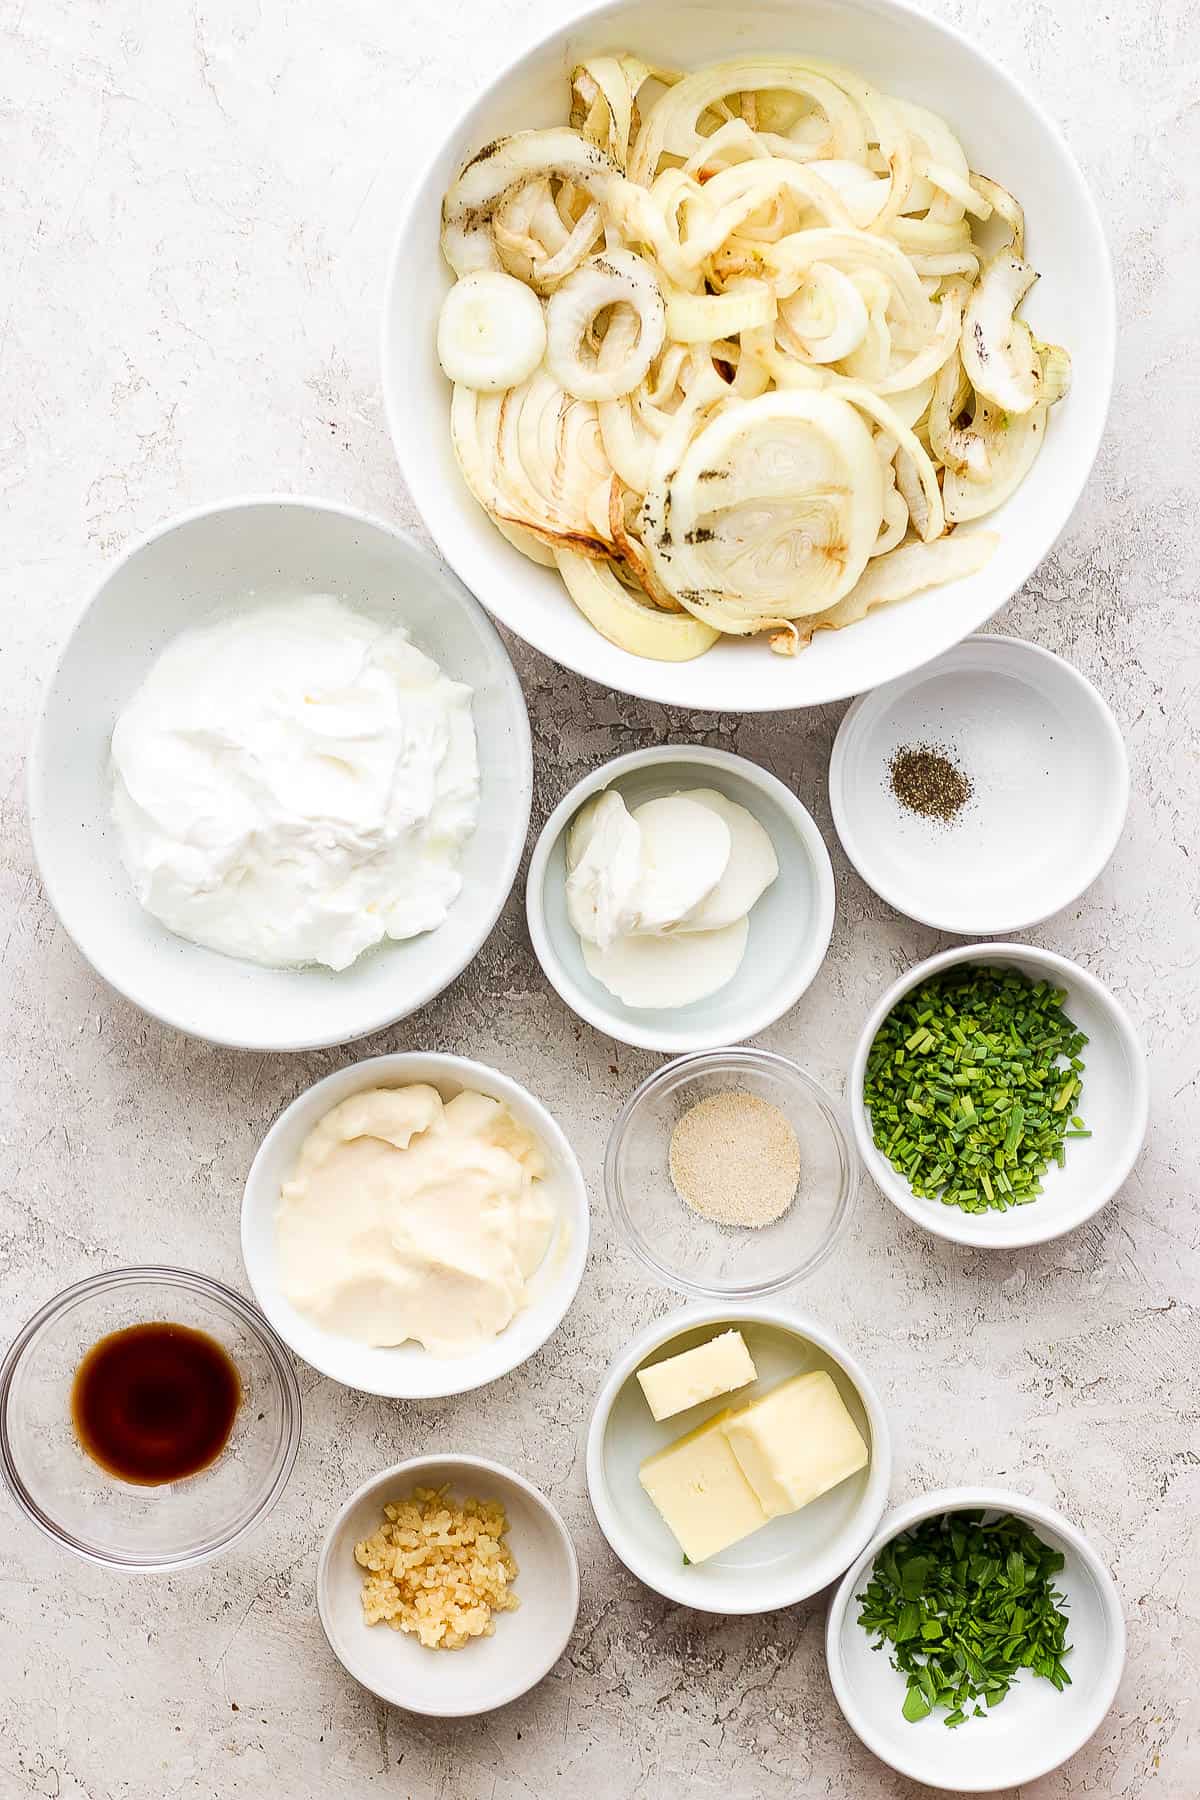 French onion dip ingredients in separate bowls.